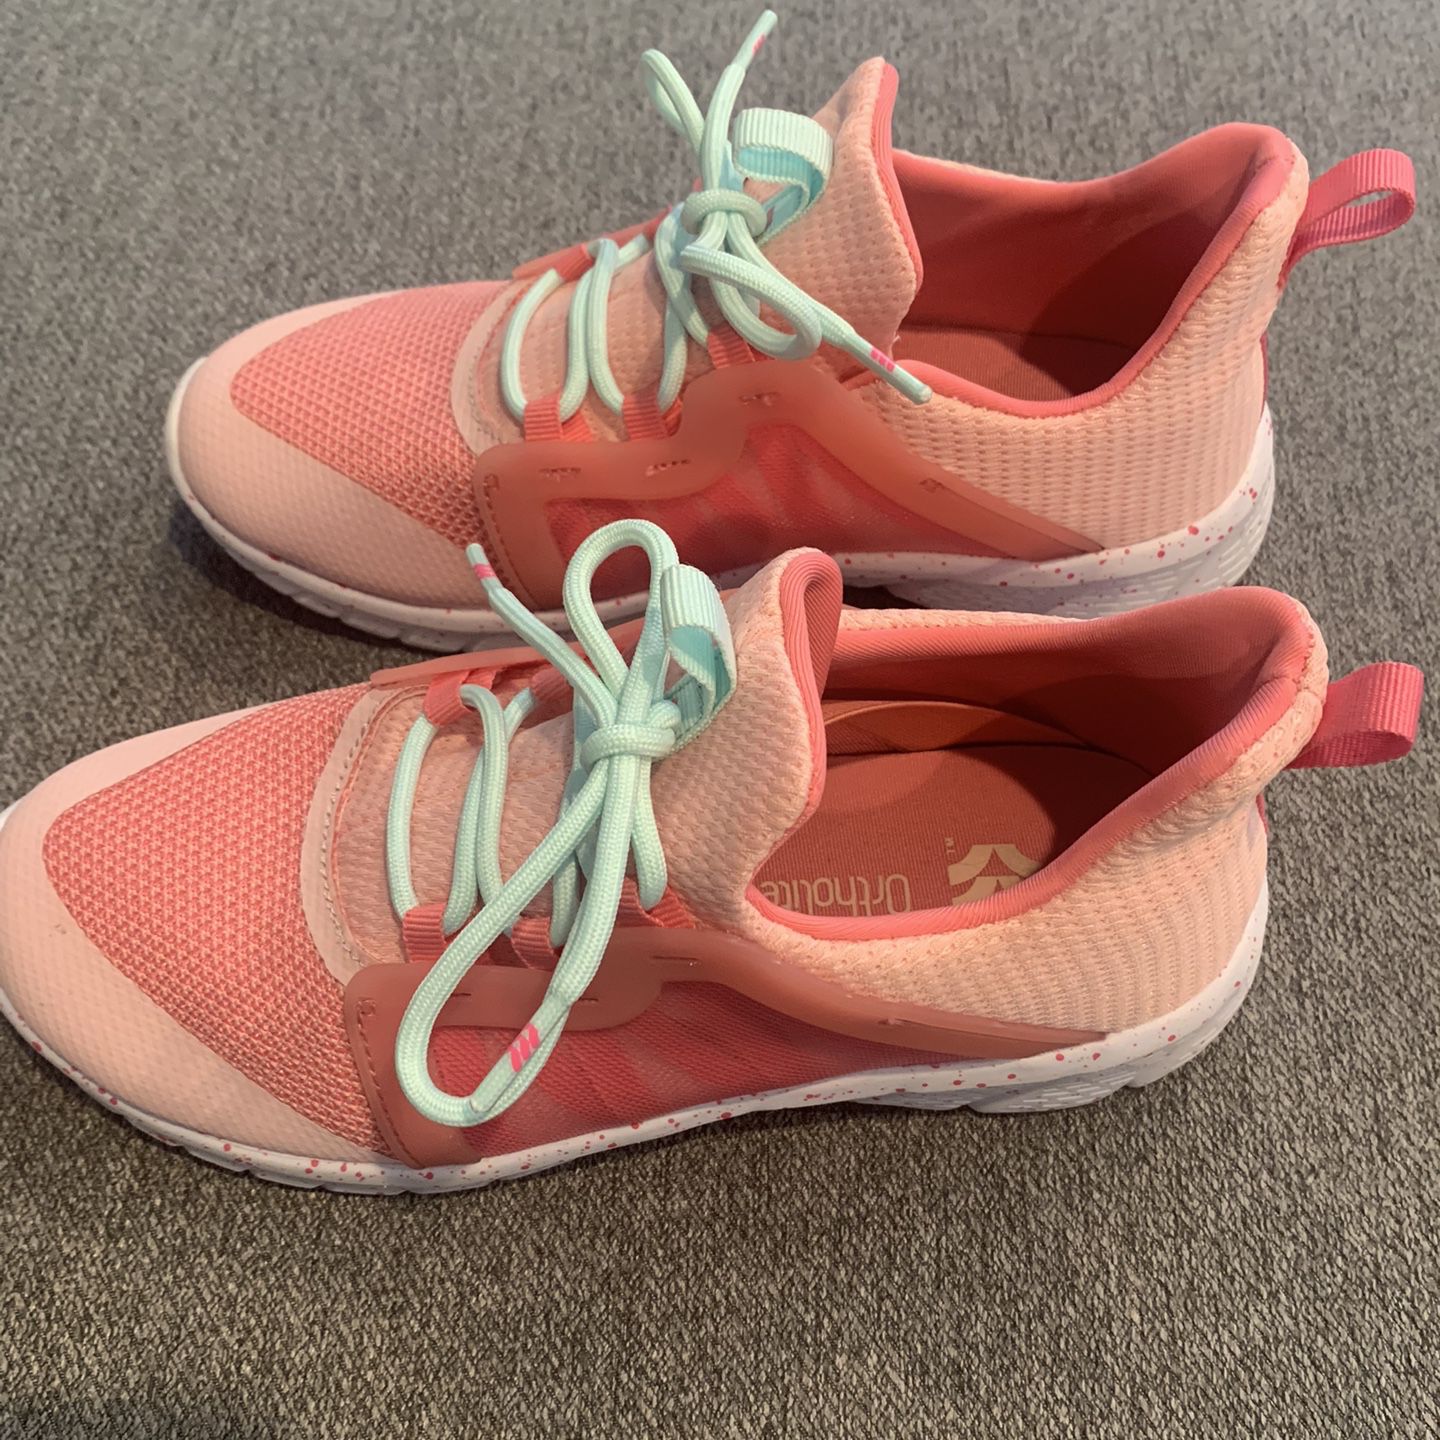 All In Motion Girls Athletic Shoes for Sale in Los Angeles, CA - OfferUp